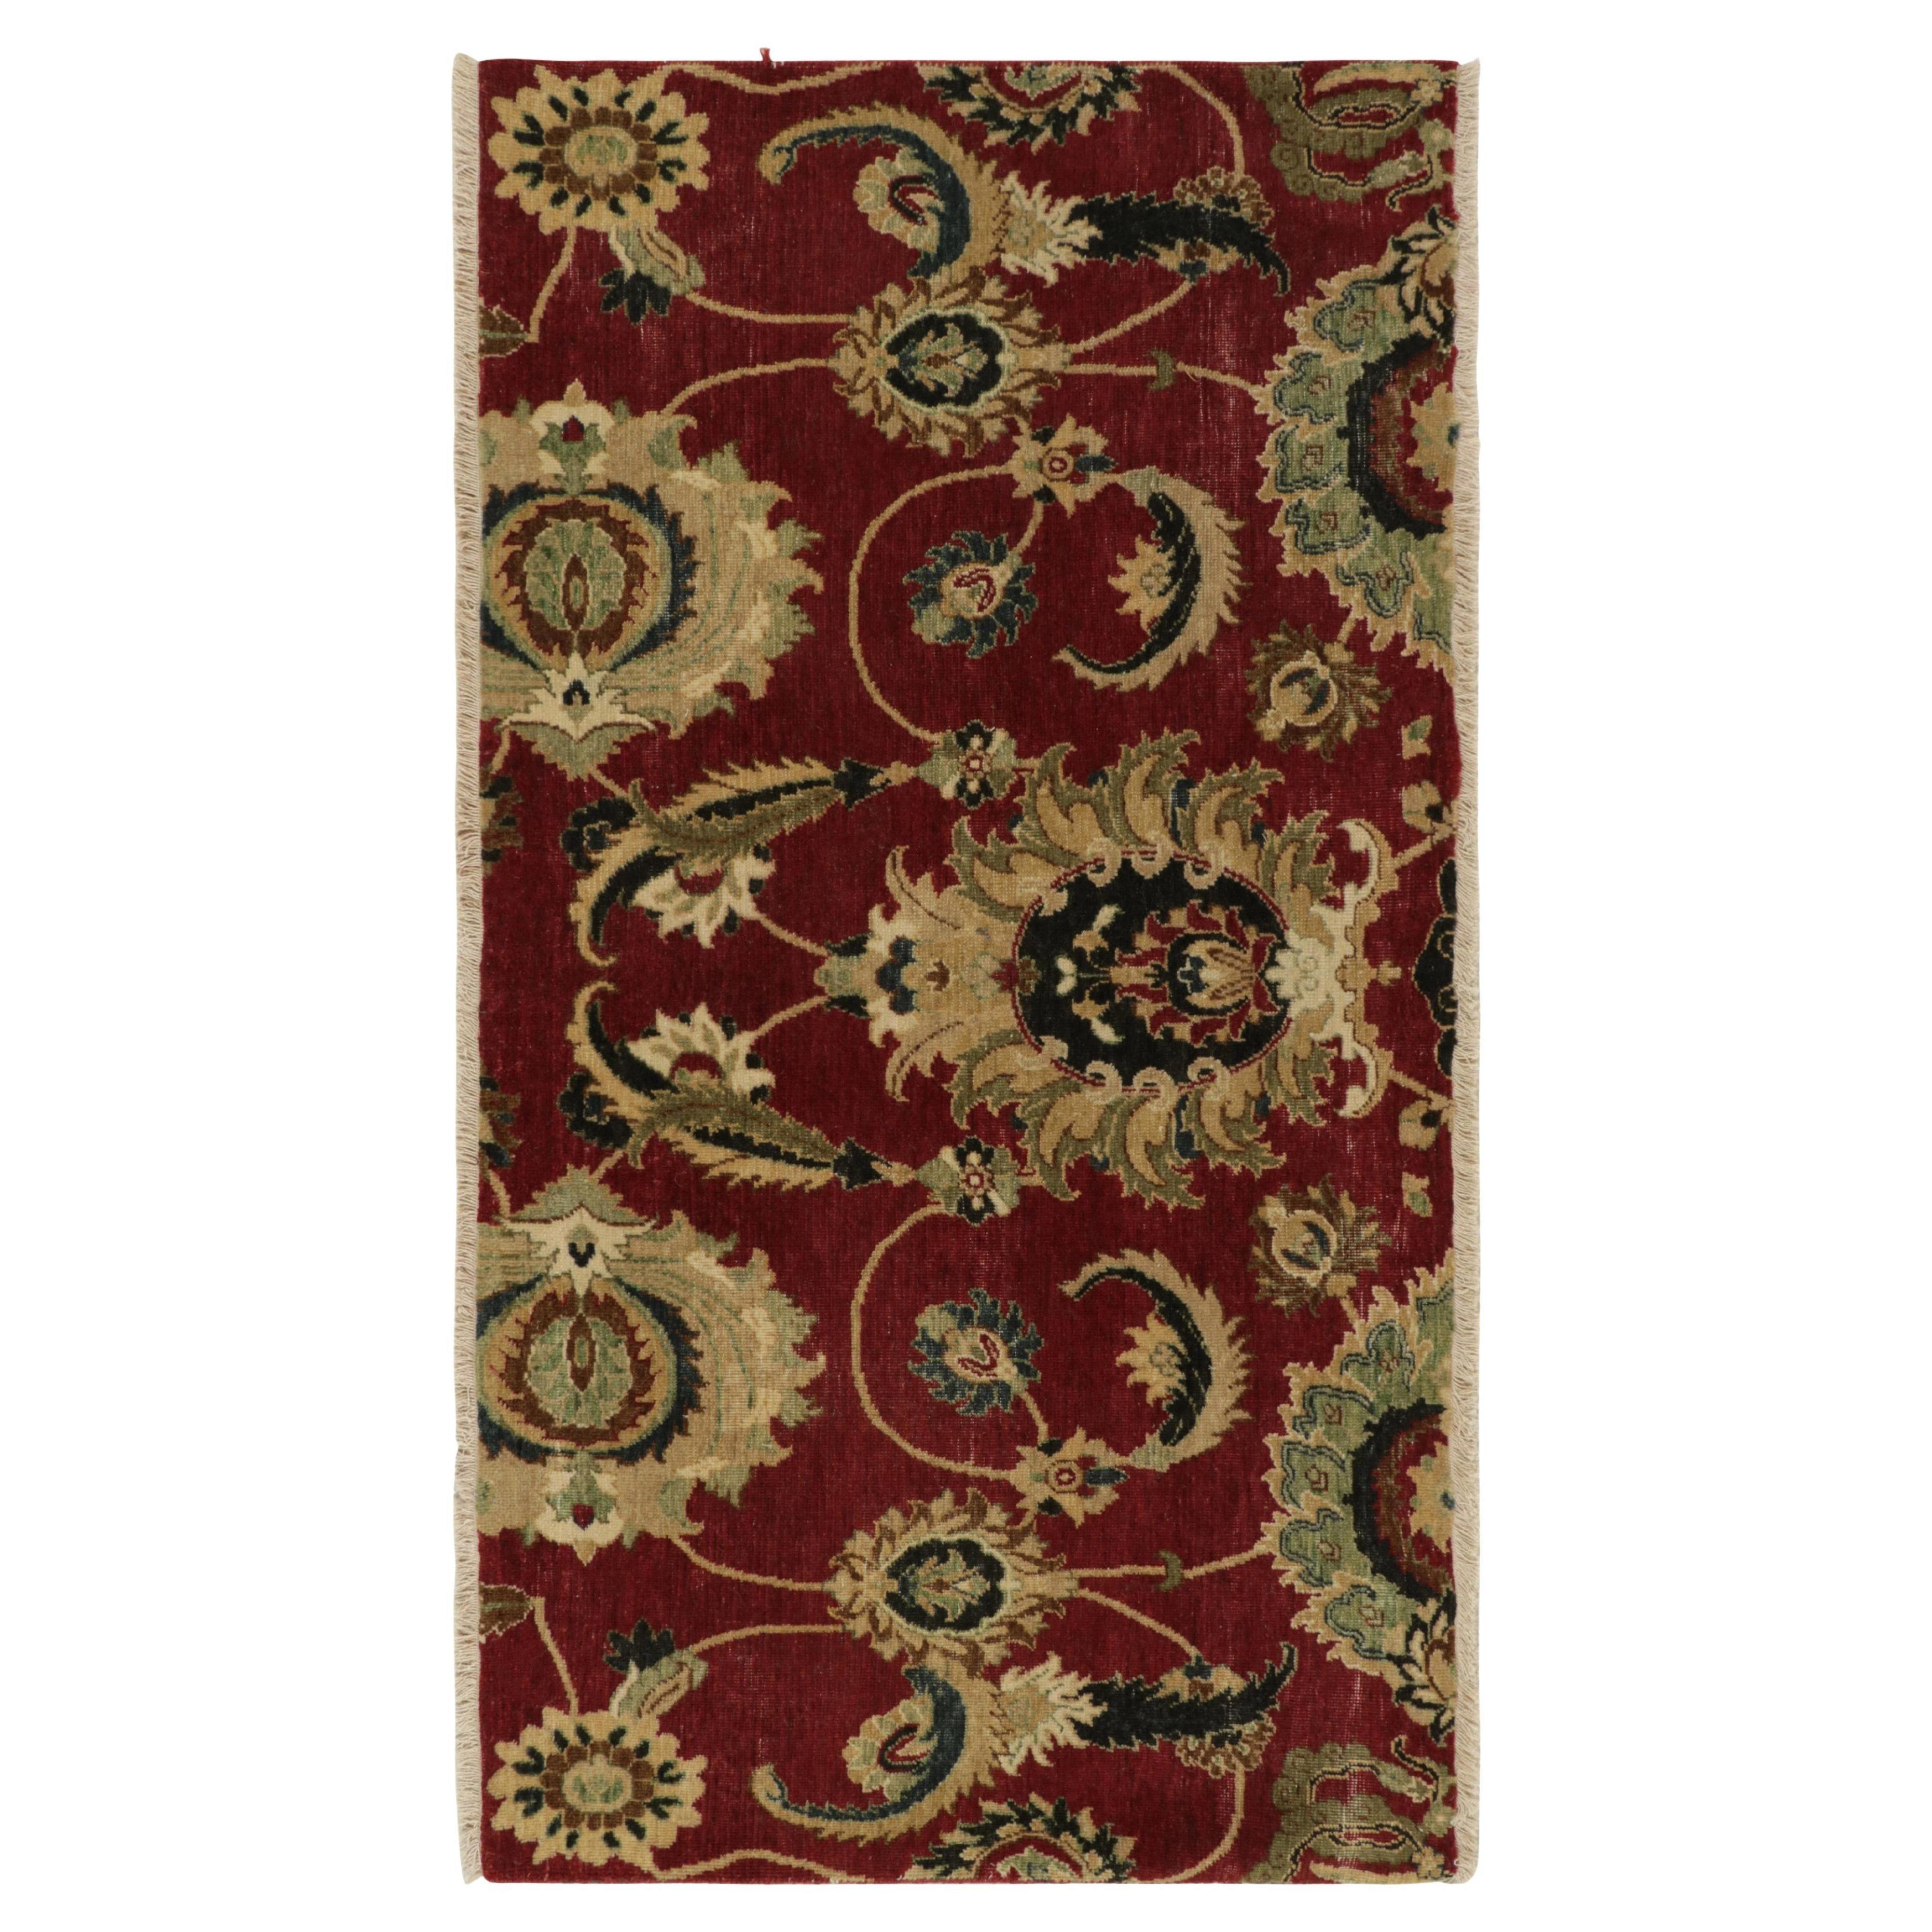 Rug & Kilim's 17th-Century Inspired Rug in Burgundy, Gold & Green Florals For Sale